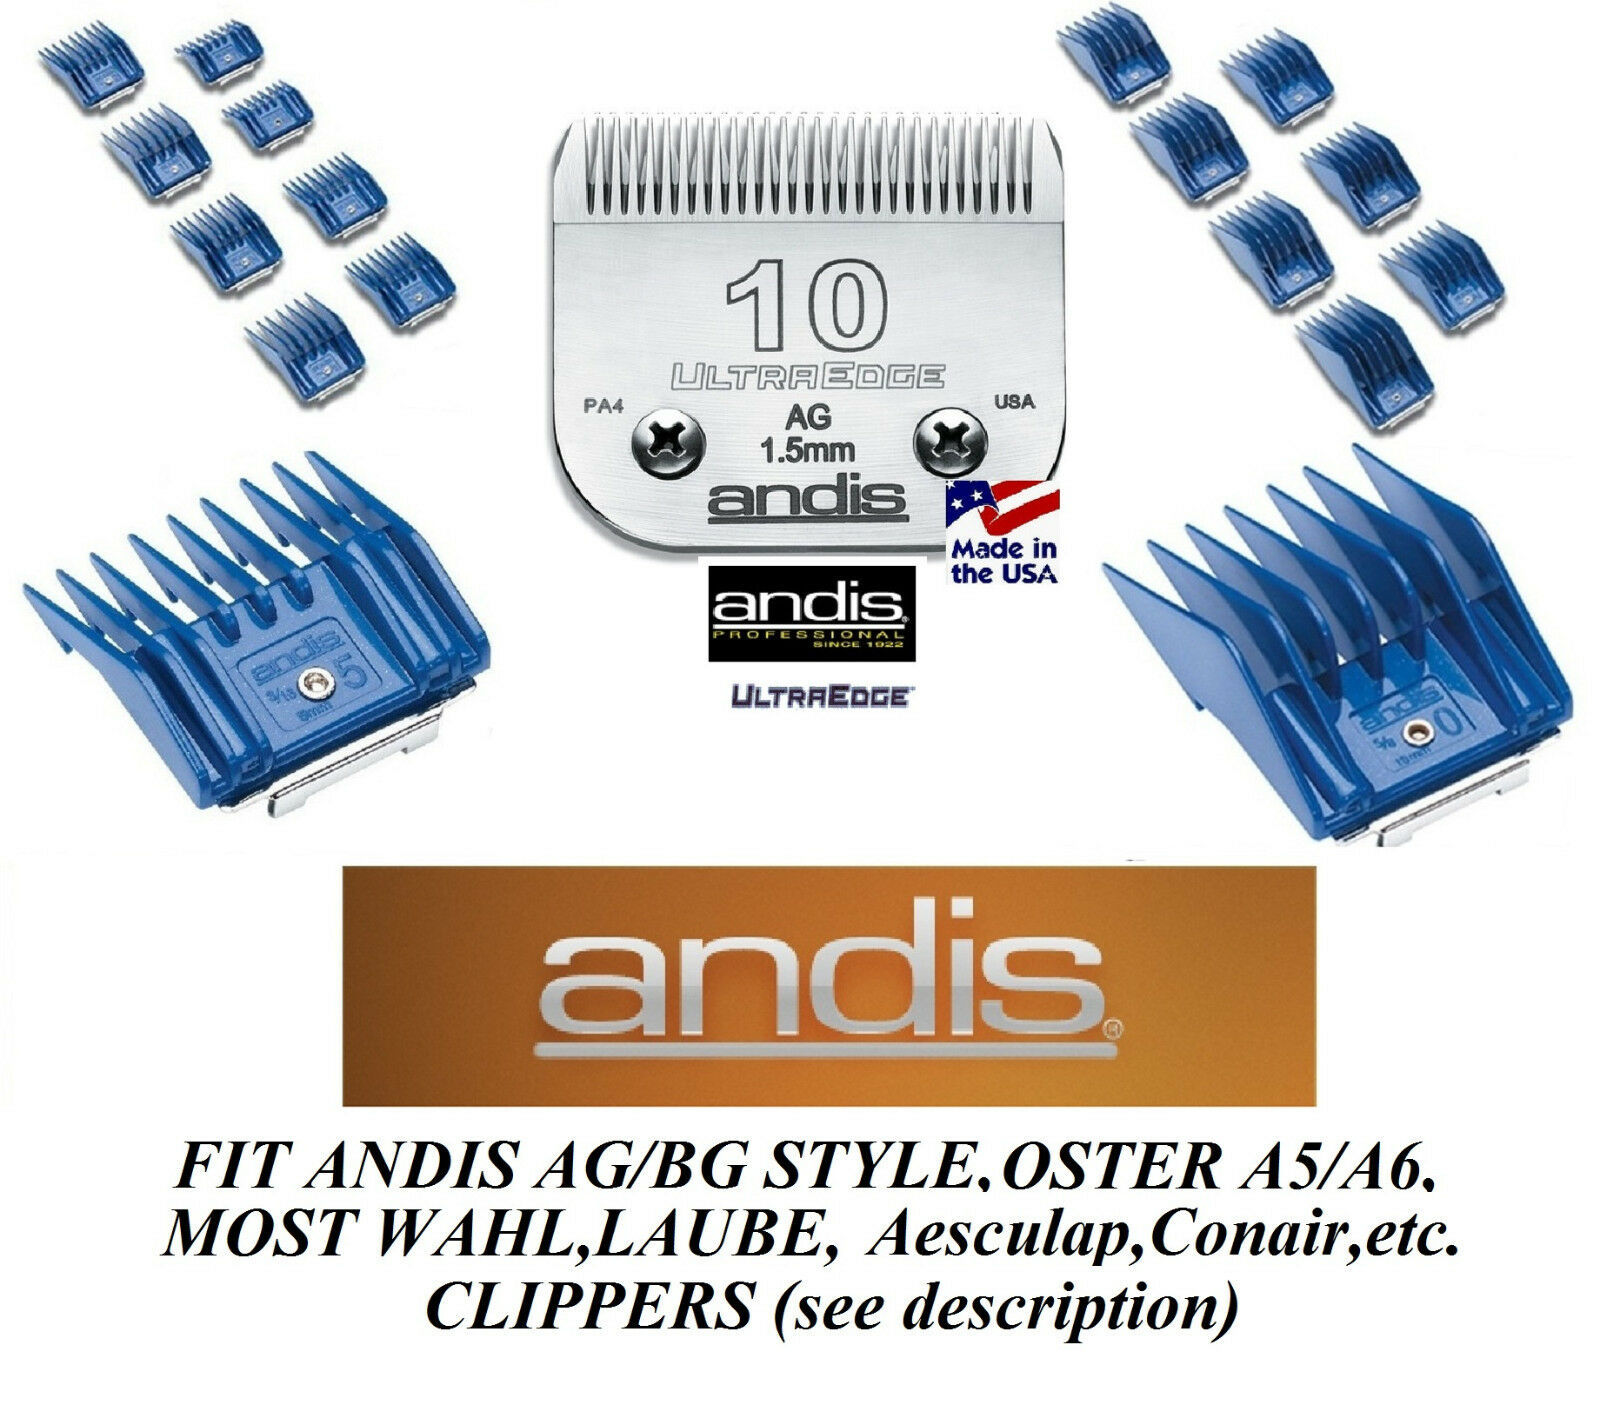 ANDIS 17 pc Guide ATTACHMENT COMB SET&UltraEdge 10 BLADE*Fit Many Oster Clipper